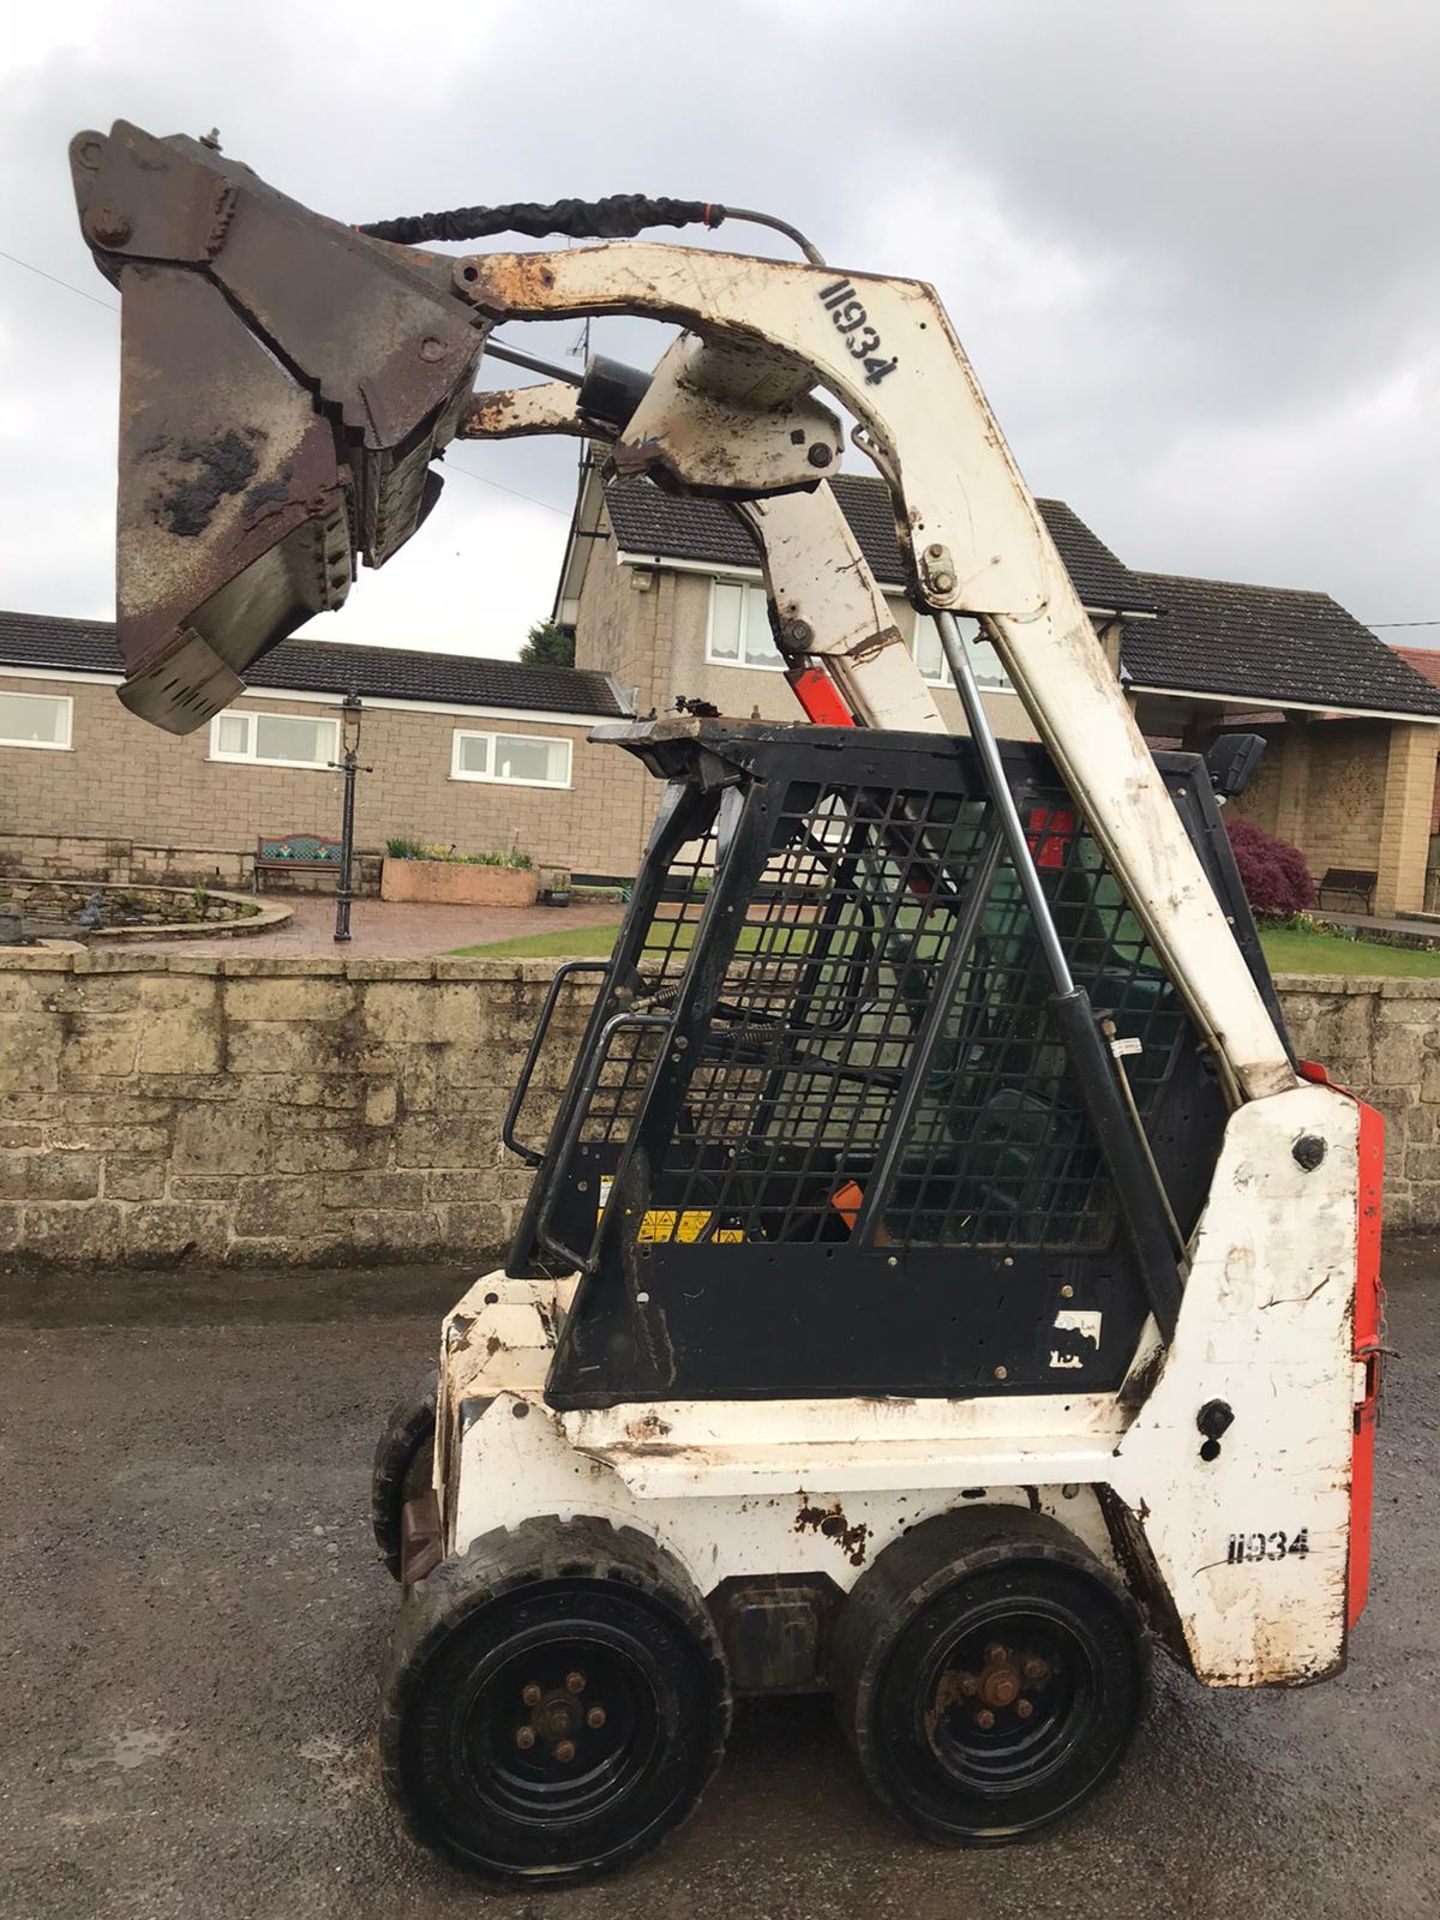 2015 BOBCAT S70 SKID STEER LOADER, 1960 HOURS, 4 IN 1 BUCKET, RUNS, DRIVES AND LIFTS *PLUS VAT* - Image 2 of 5